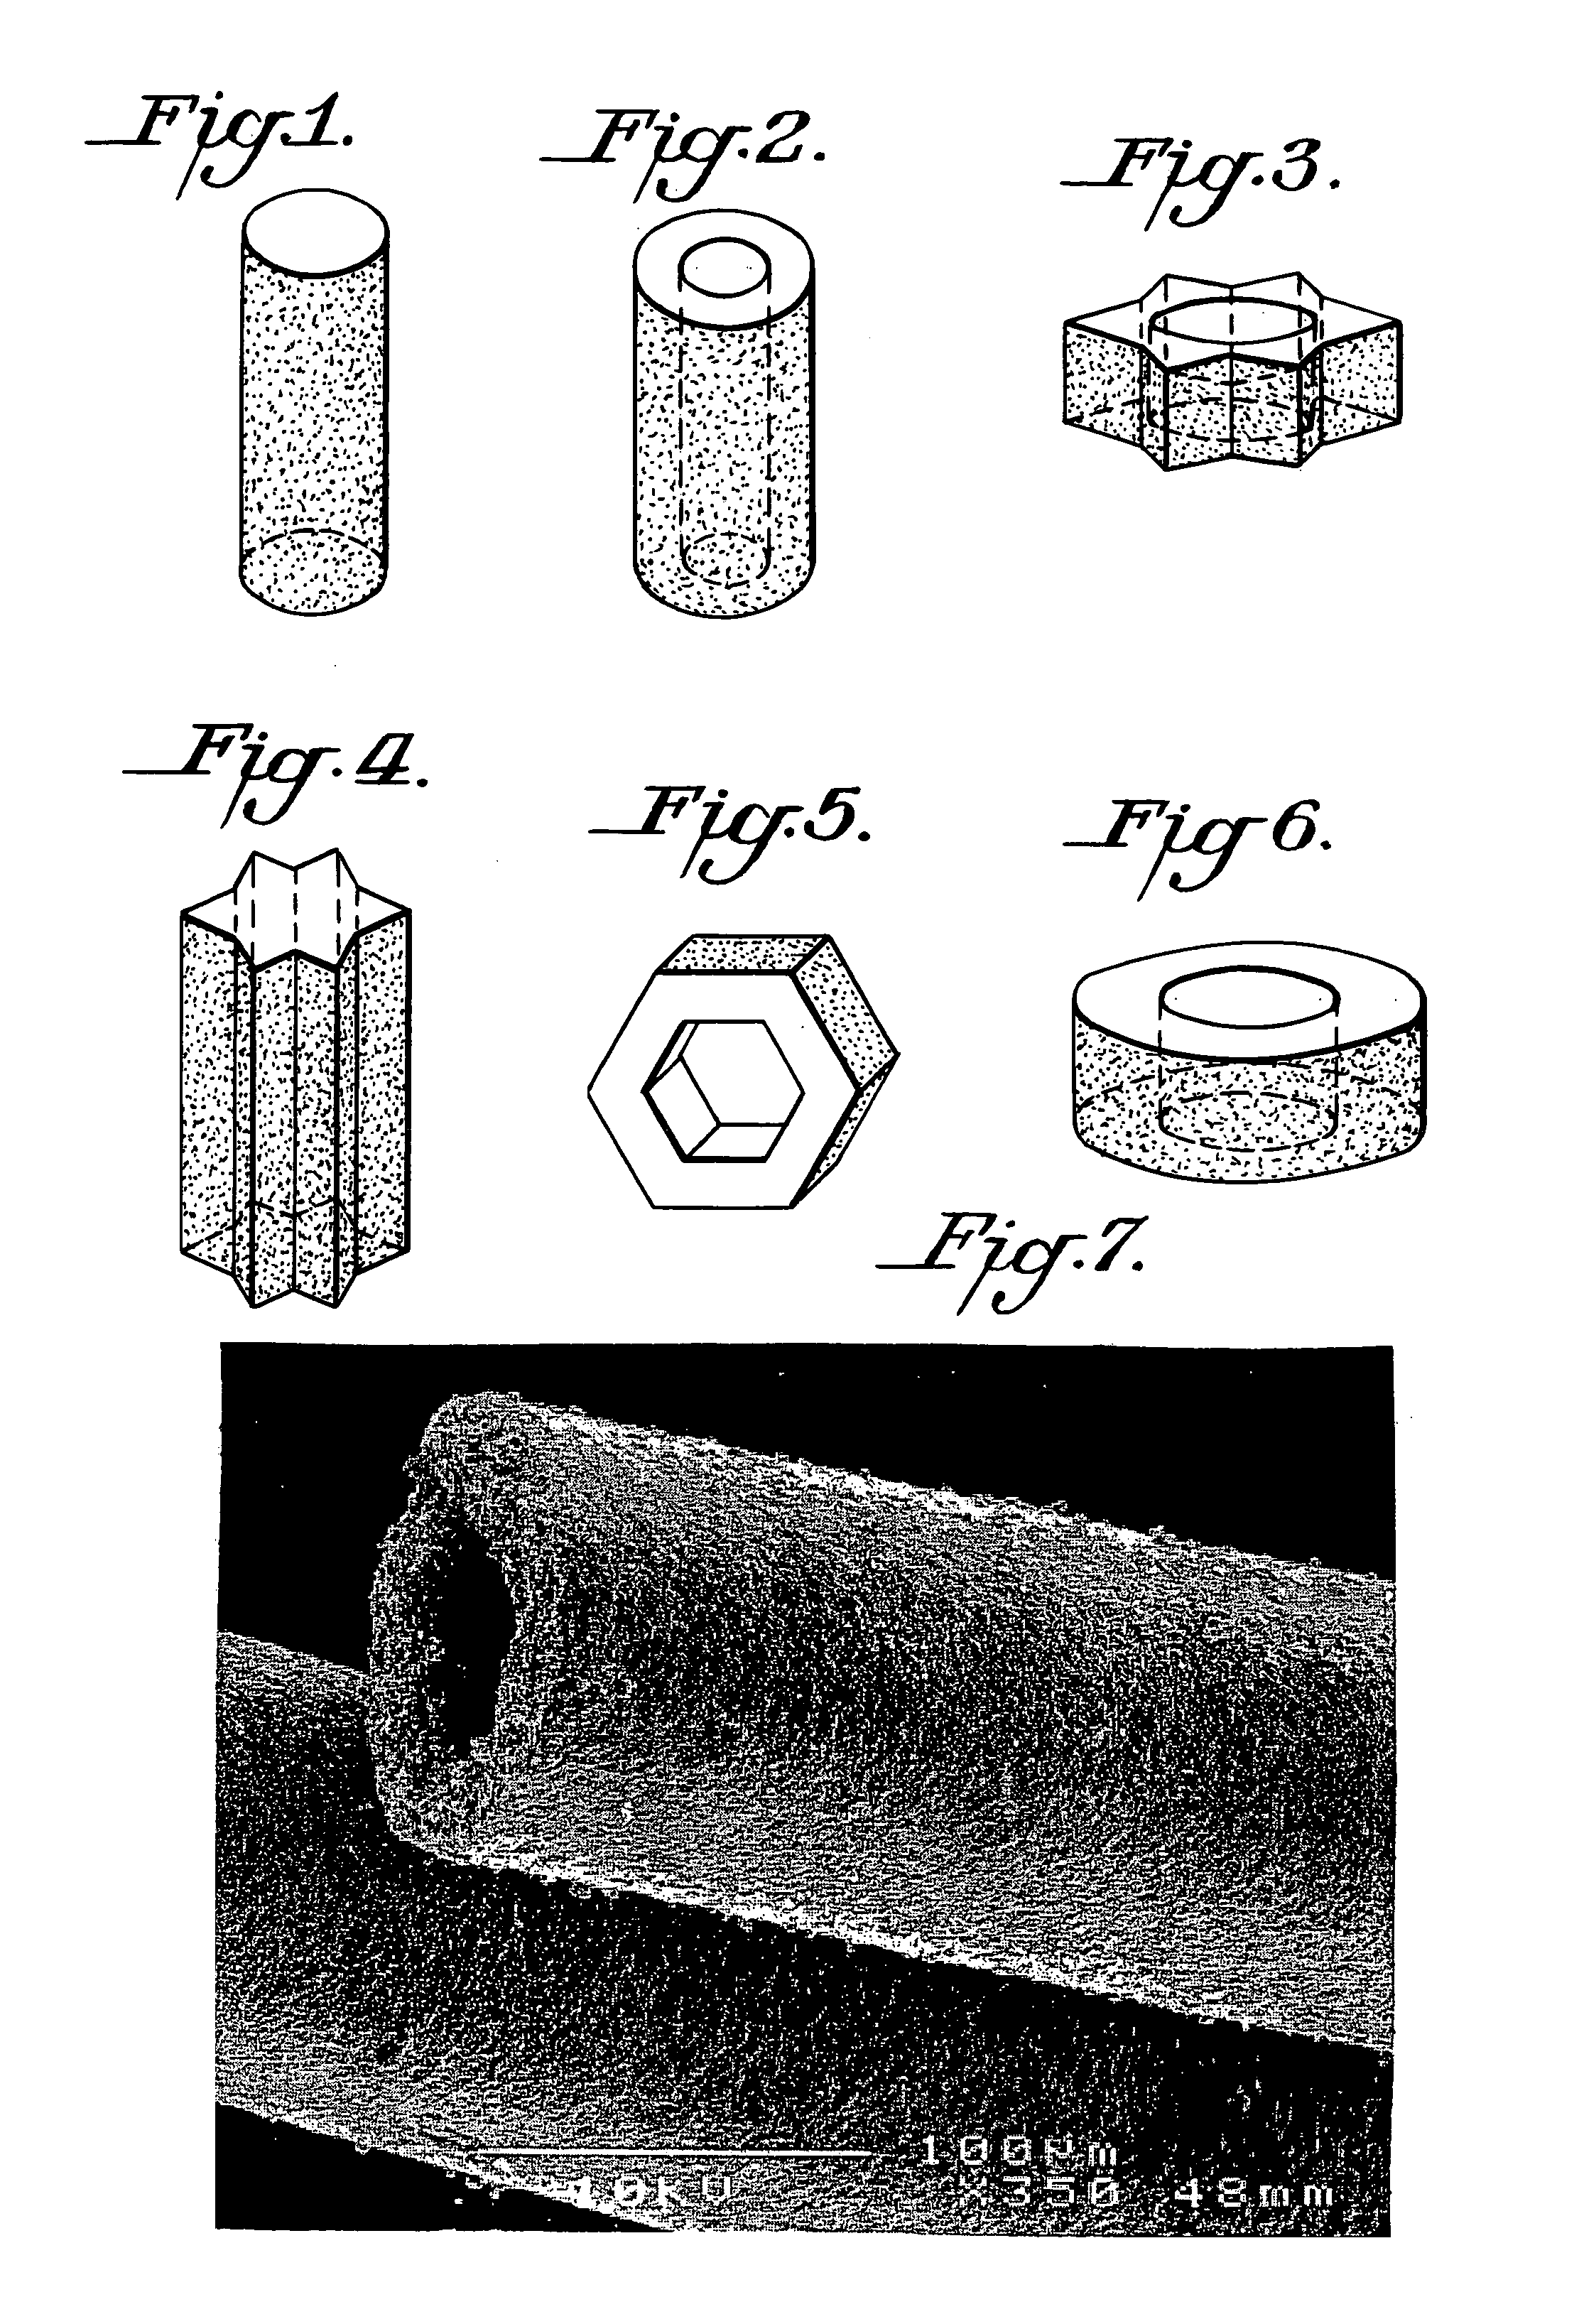 Microcrystalline alpha-Al2O3 shaped body, method for the production and use thereof